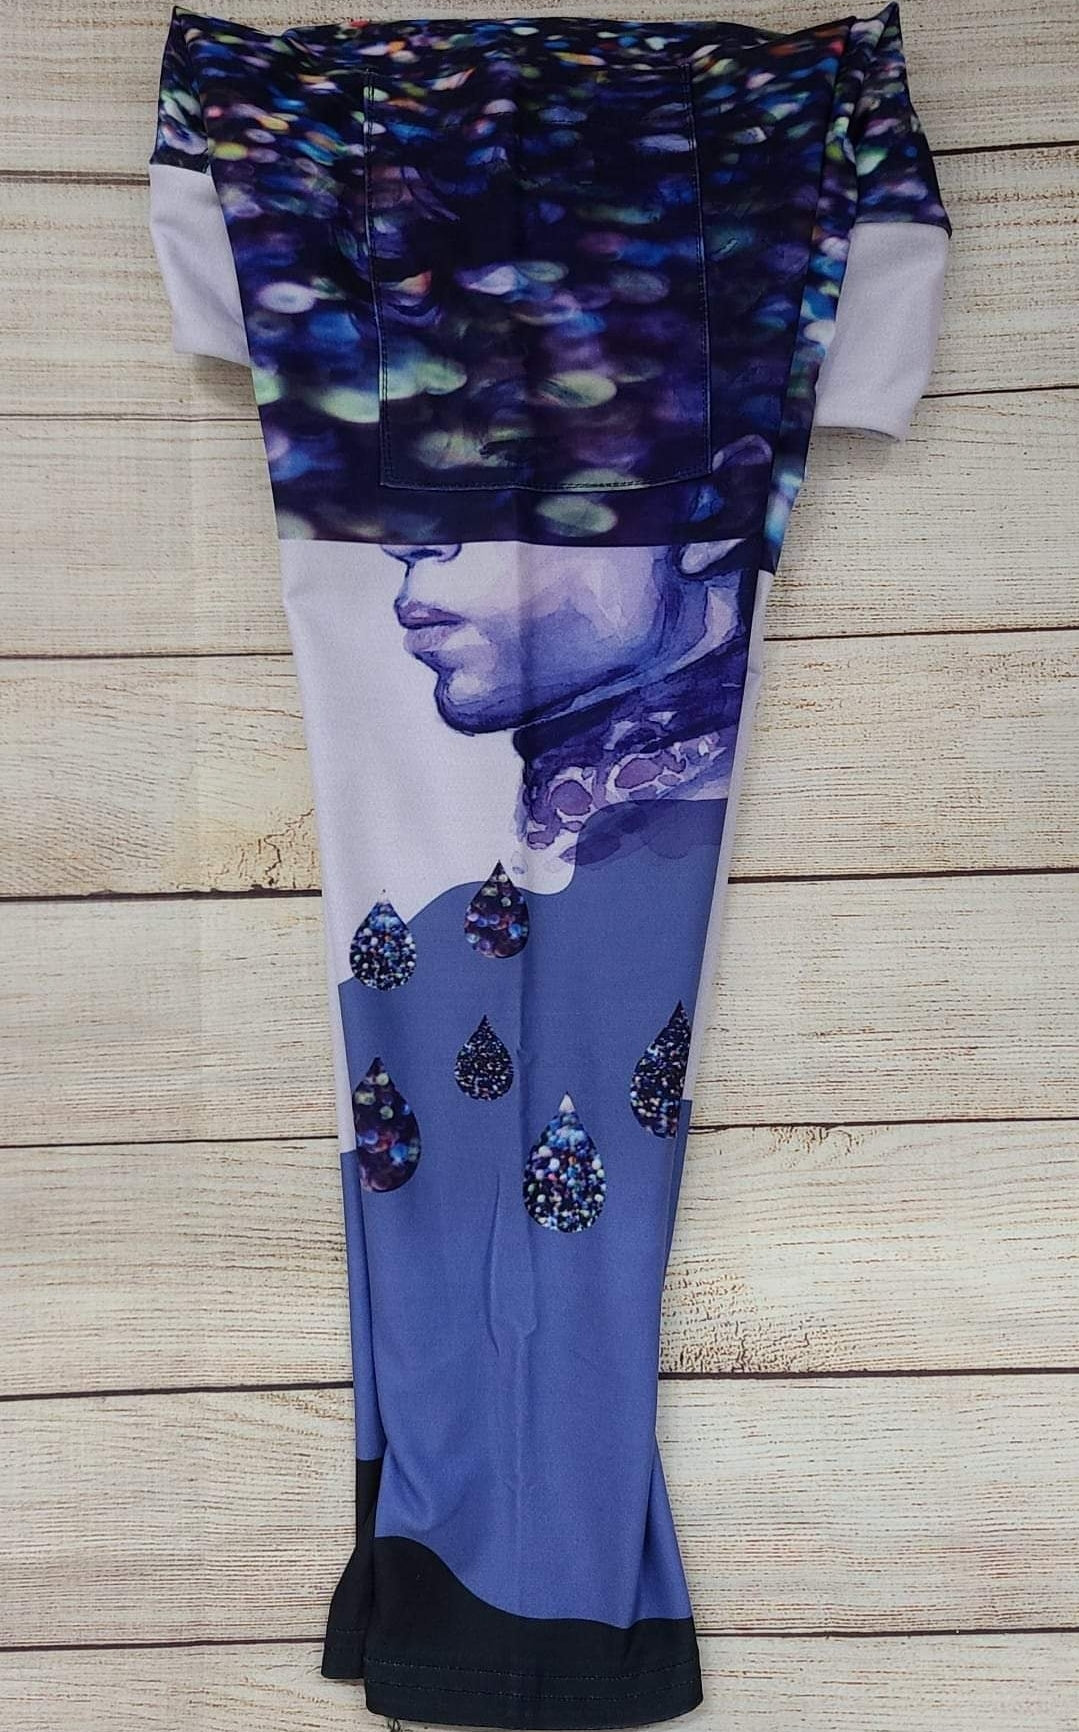 Prince leggings and capris with pockets